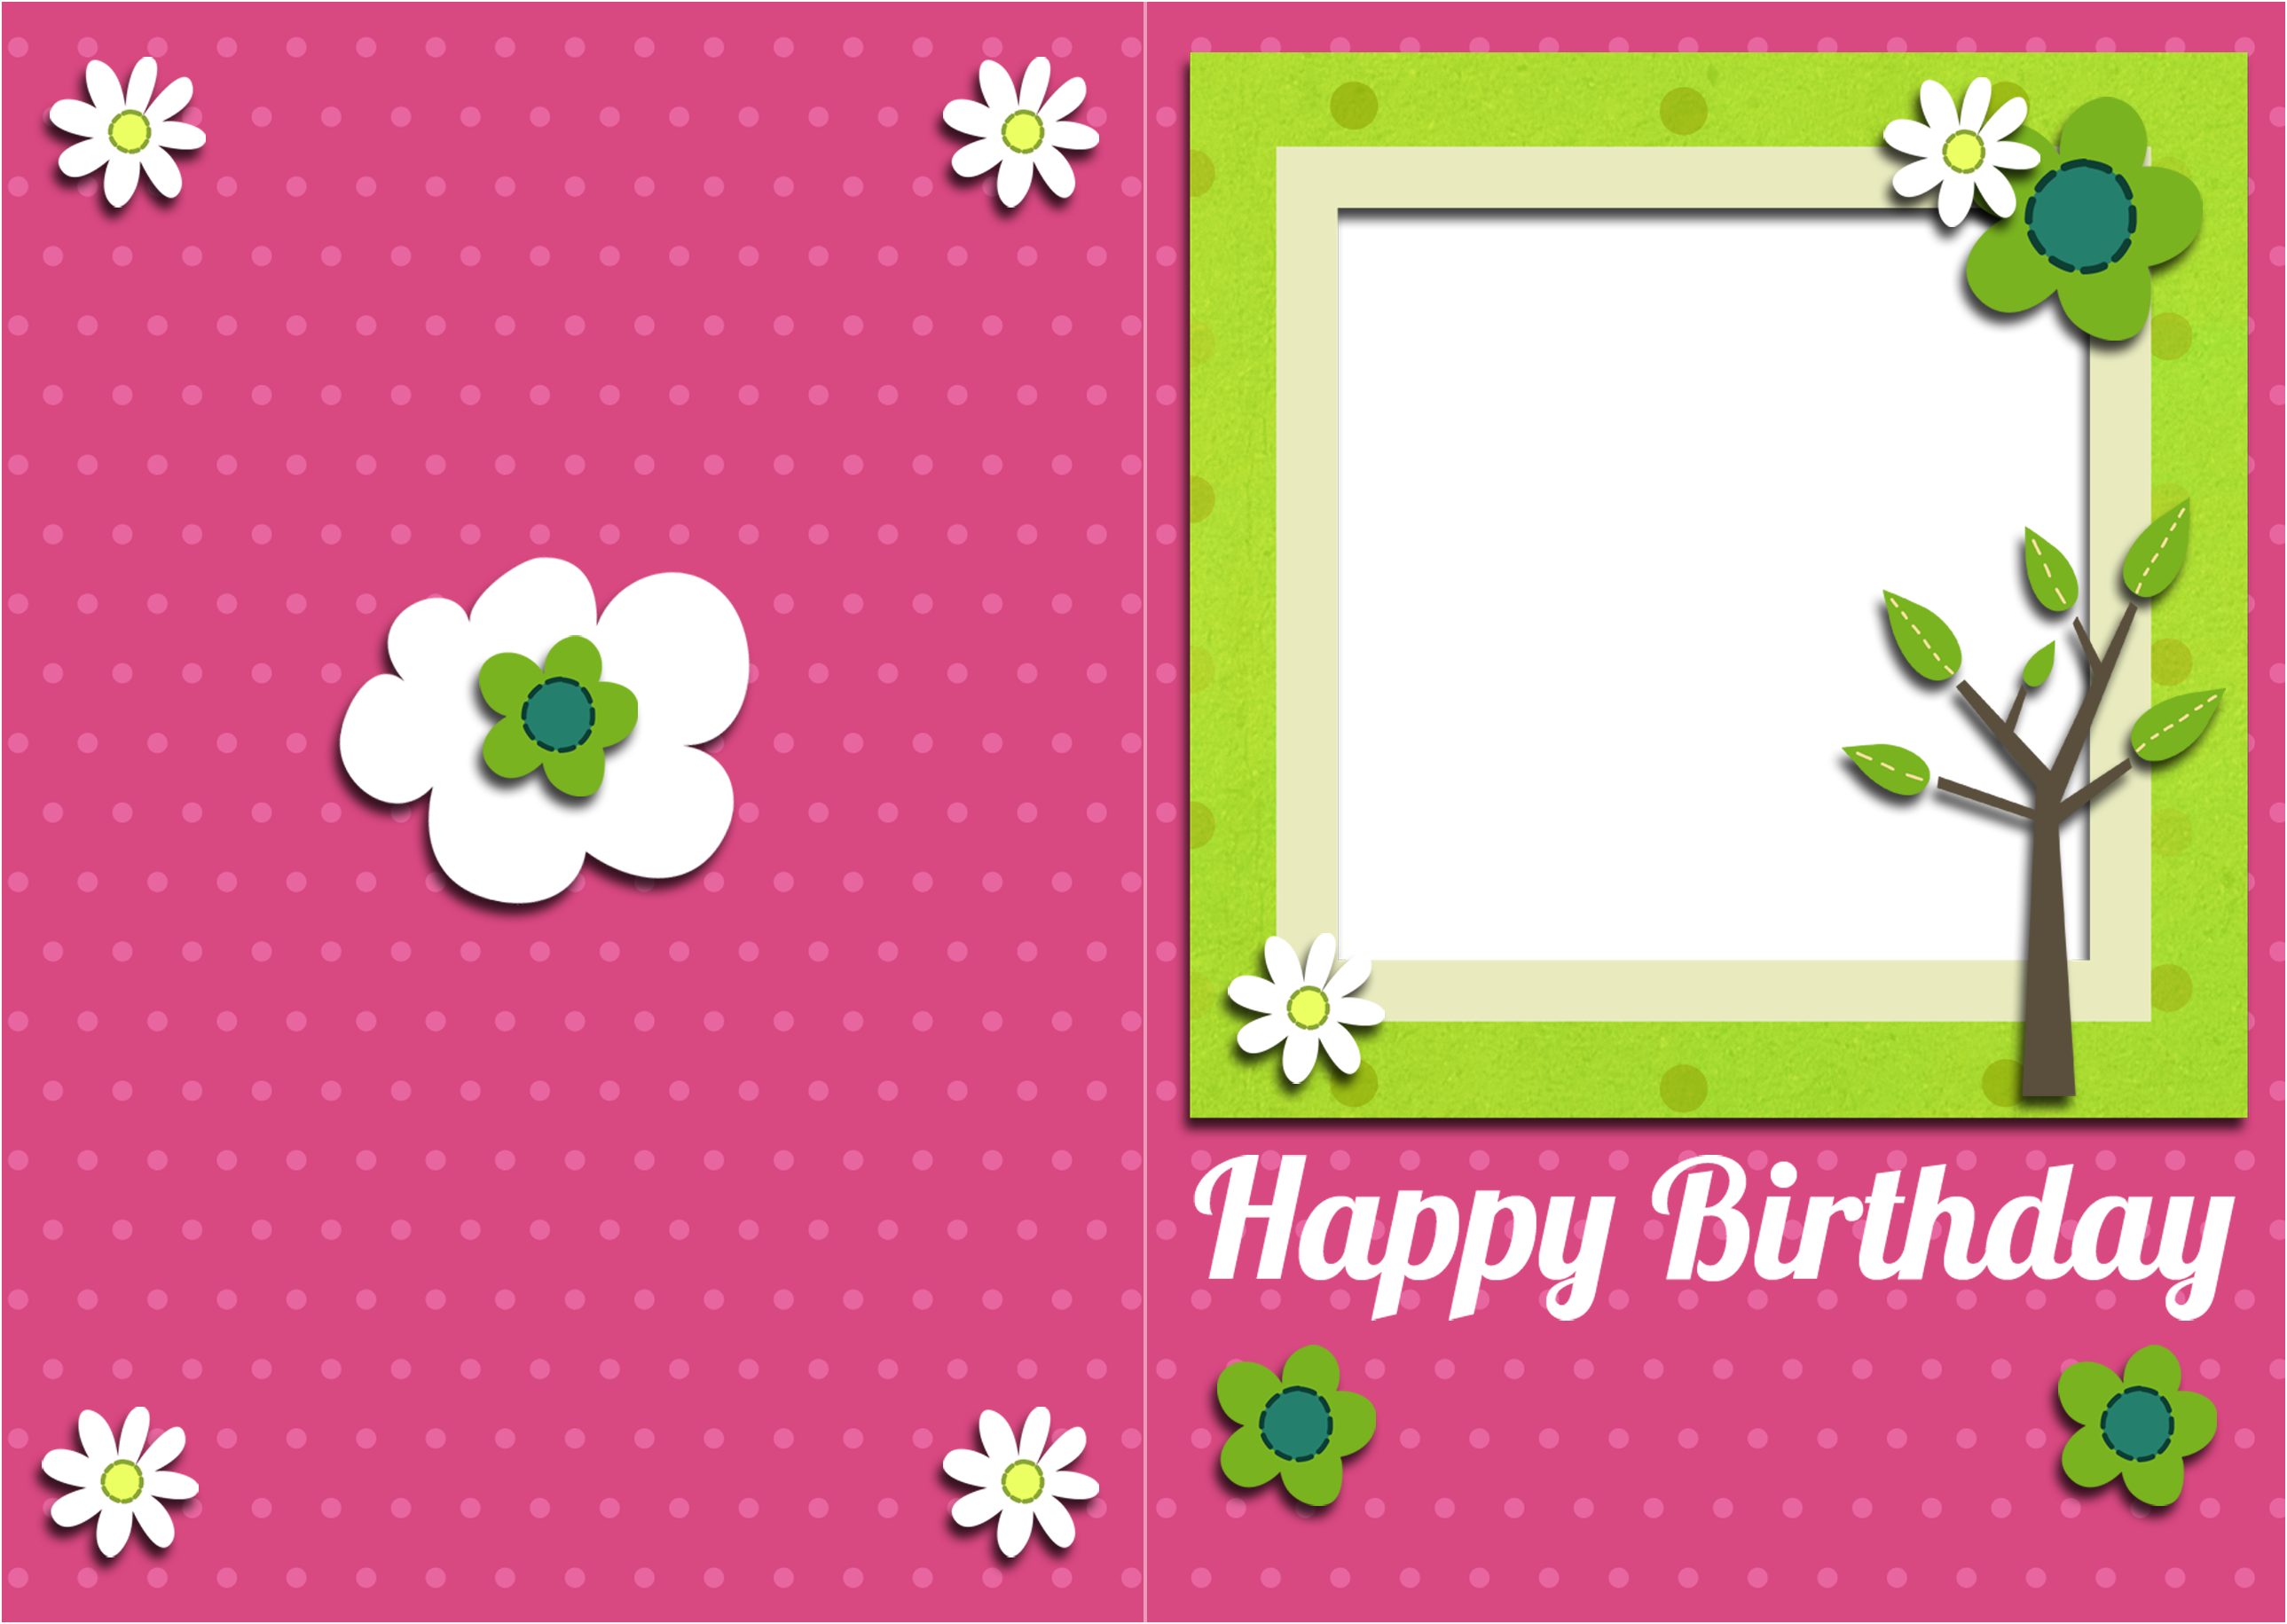 Happy Birthday Card Template Word from www.thewowstyle.com